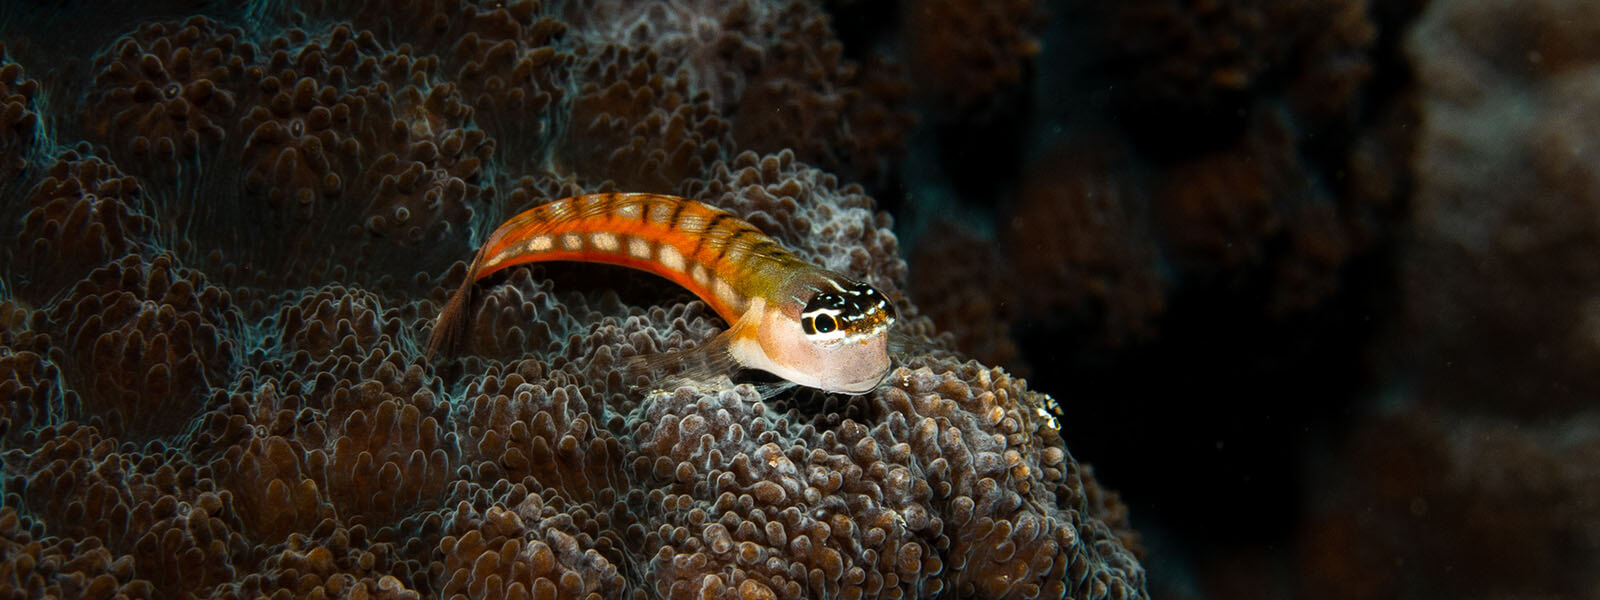 Clown blenny photographed while snorkeling in Alor, Indonesia